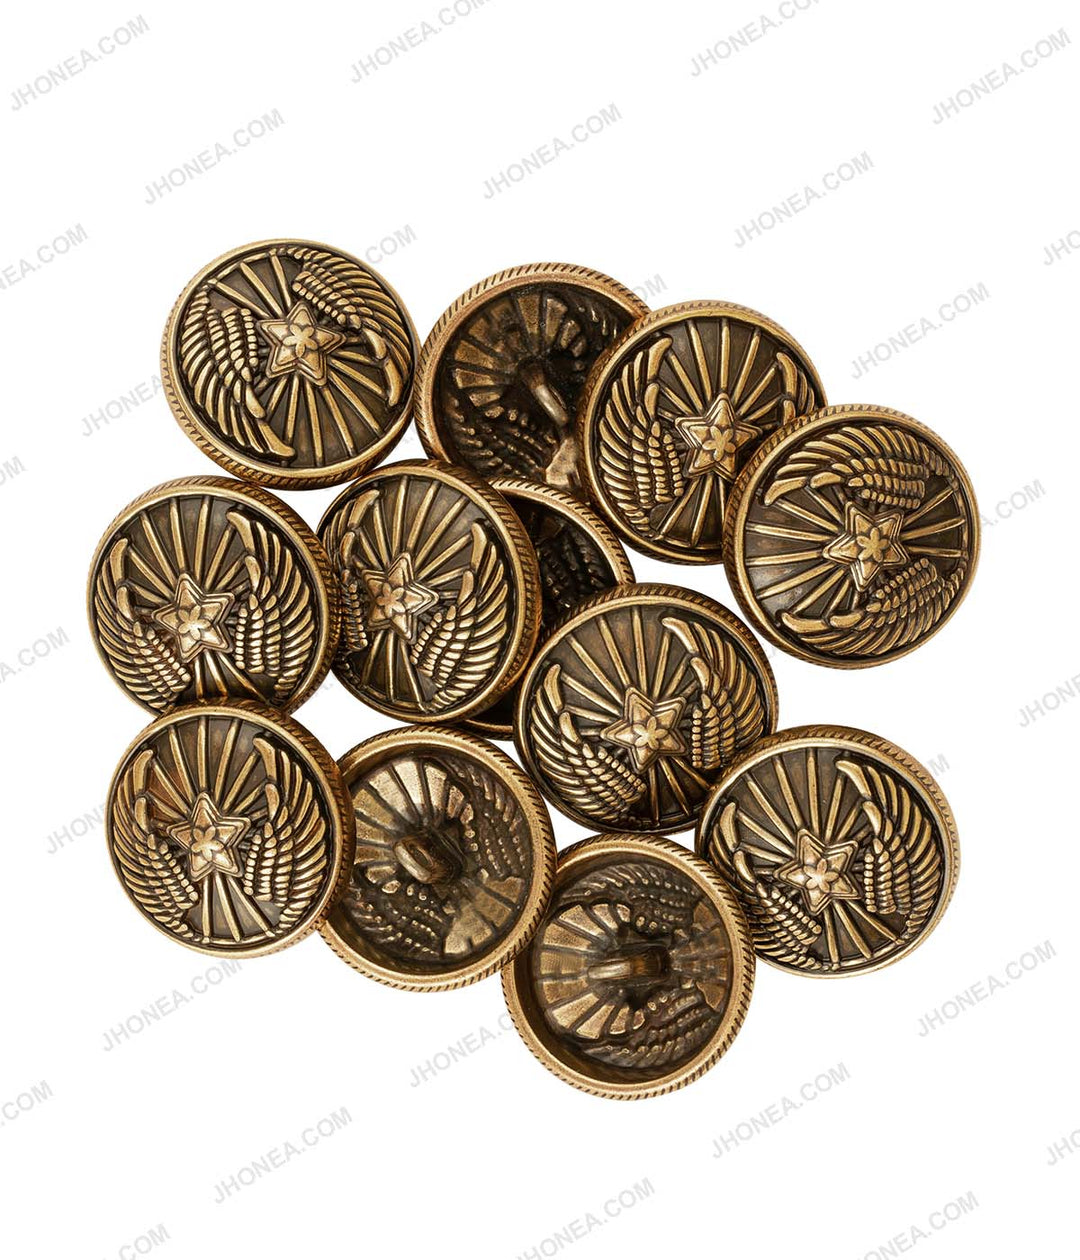 Premium Antique Vintage Winged Star Design Buttons for Jackets in Antique Gold Color